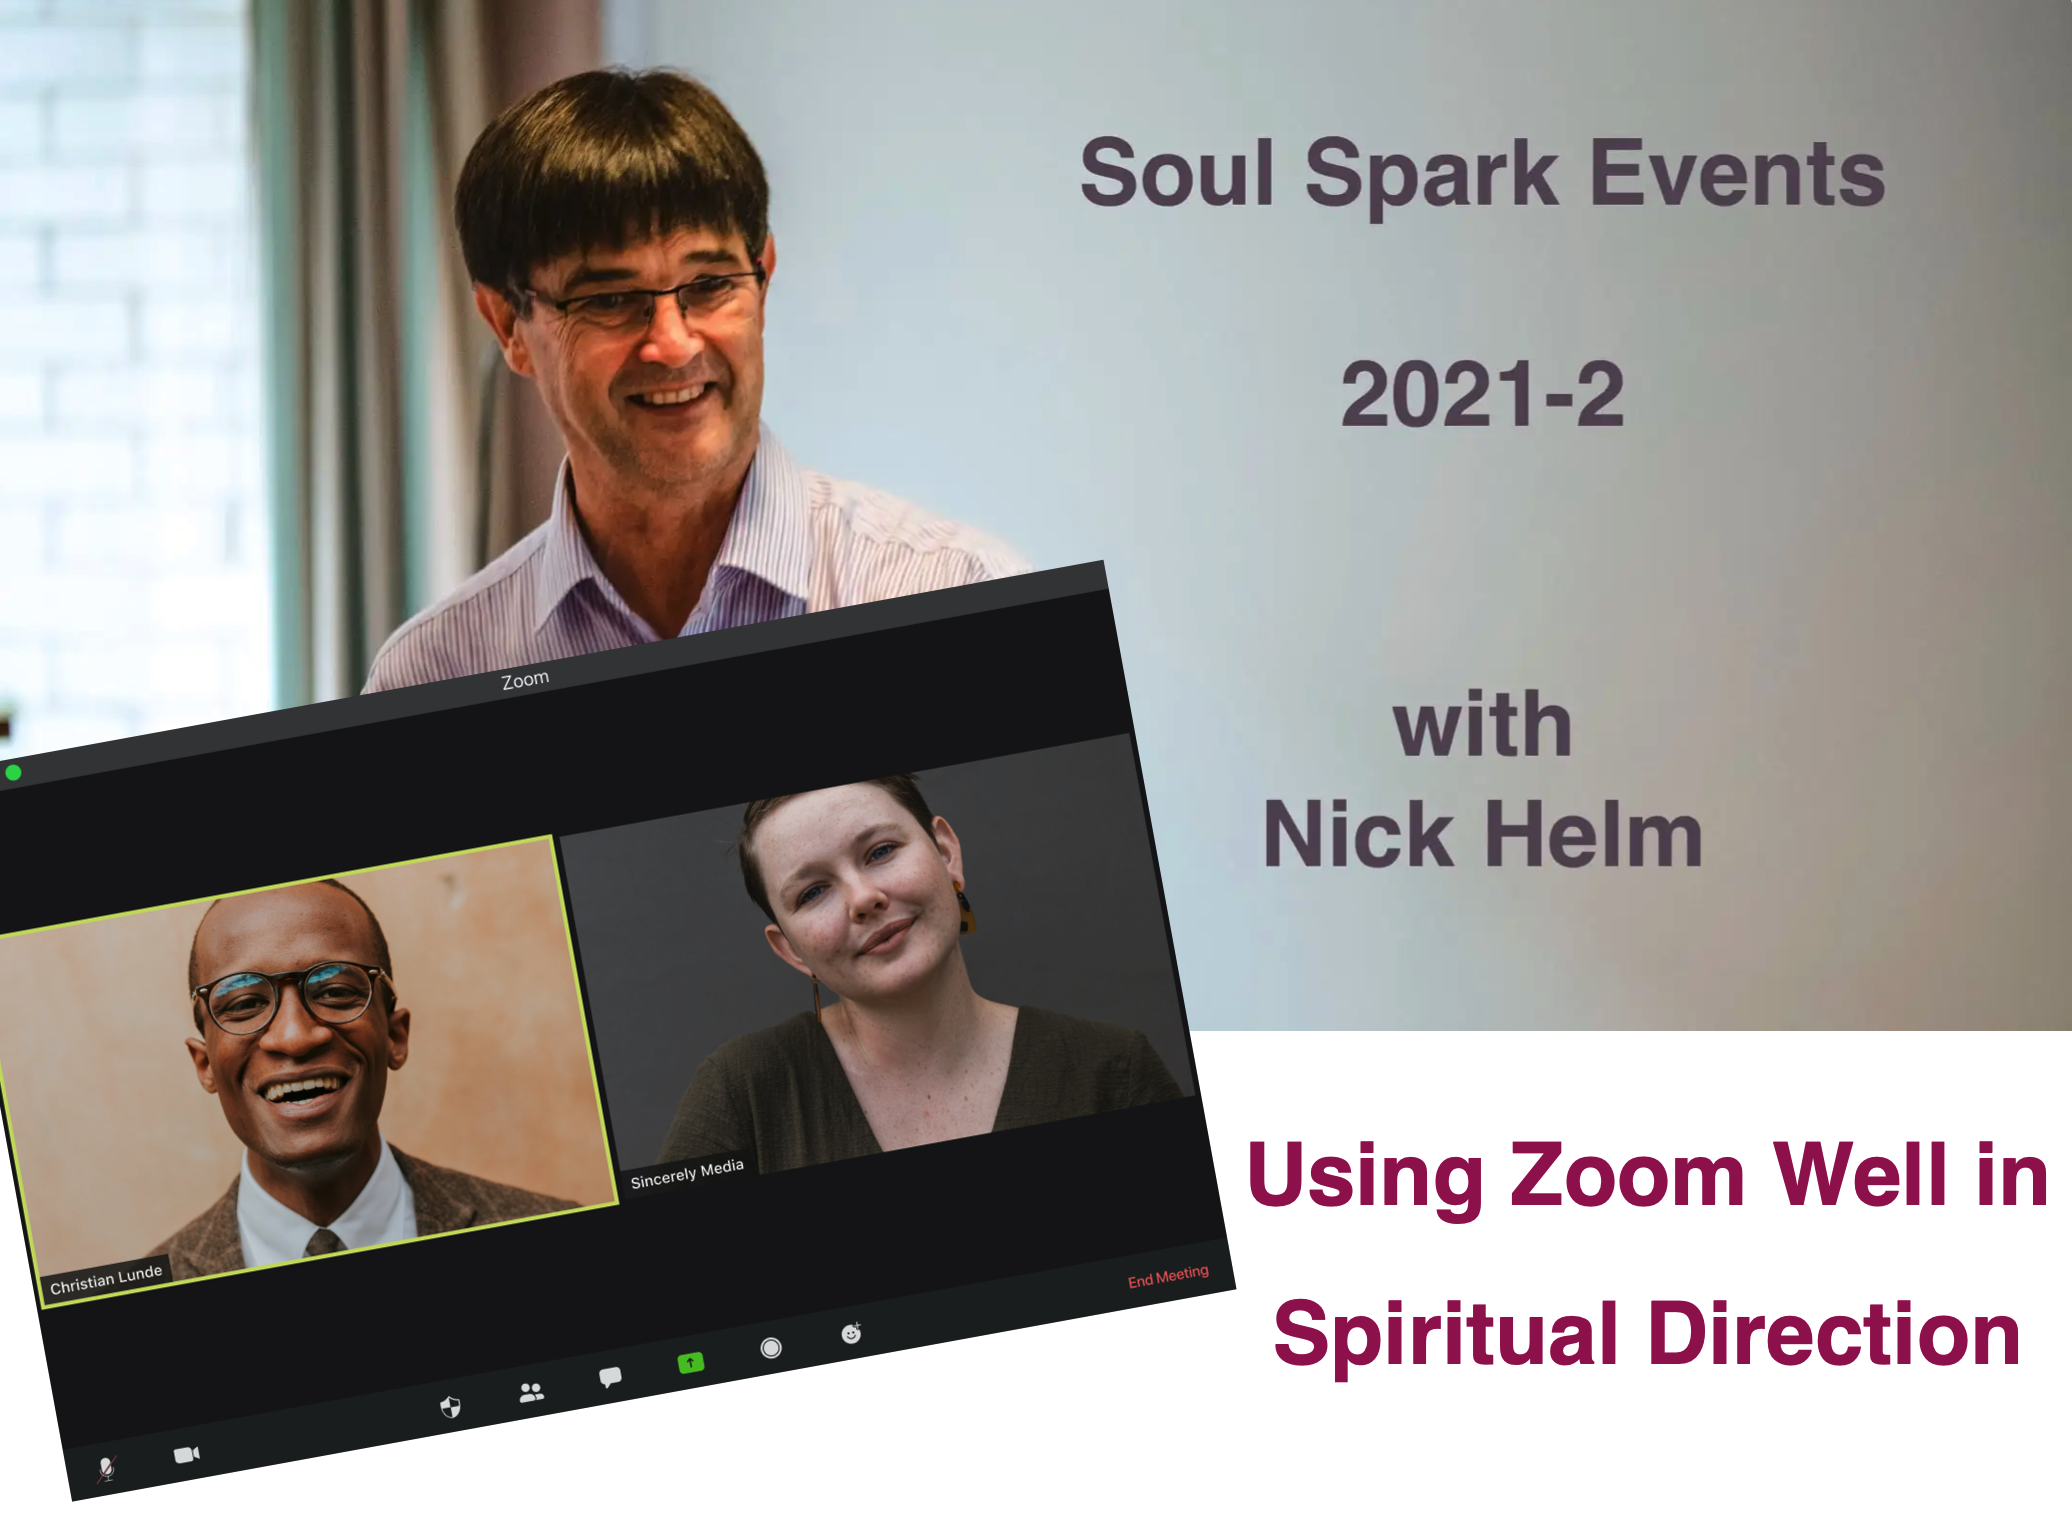 Using Zoom well in Spiritual Direction